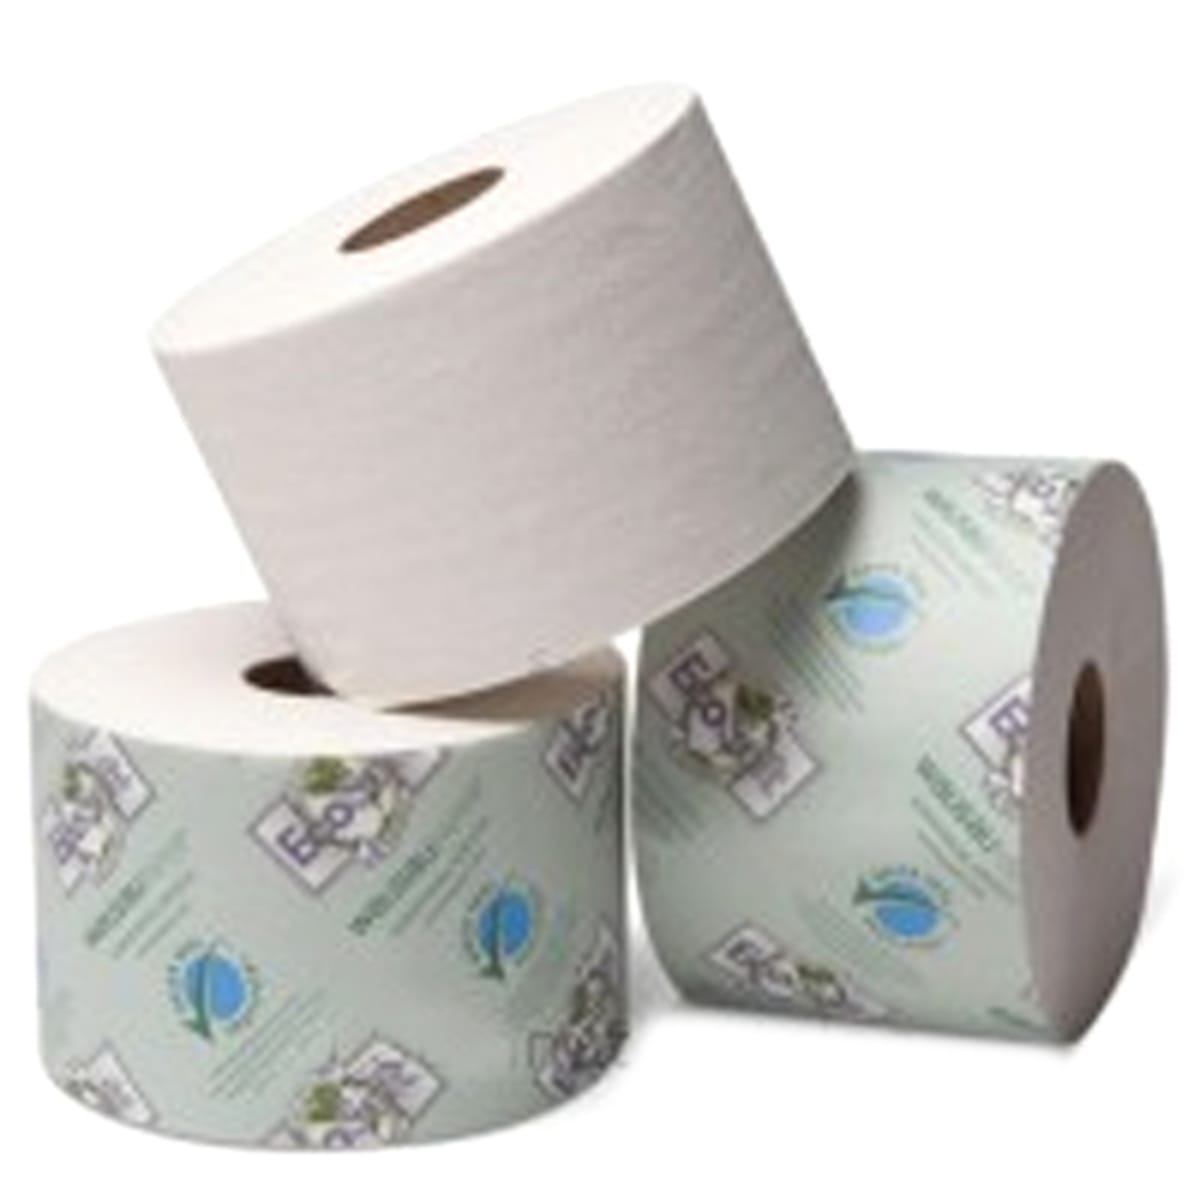 Toilet Paper Wc world – Packadoro